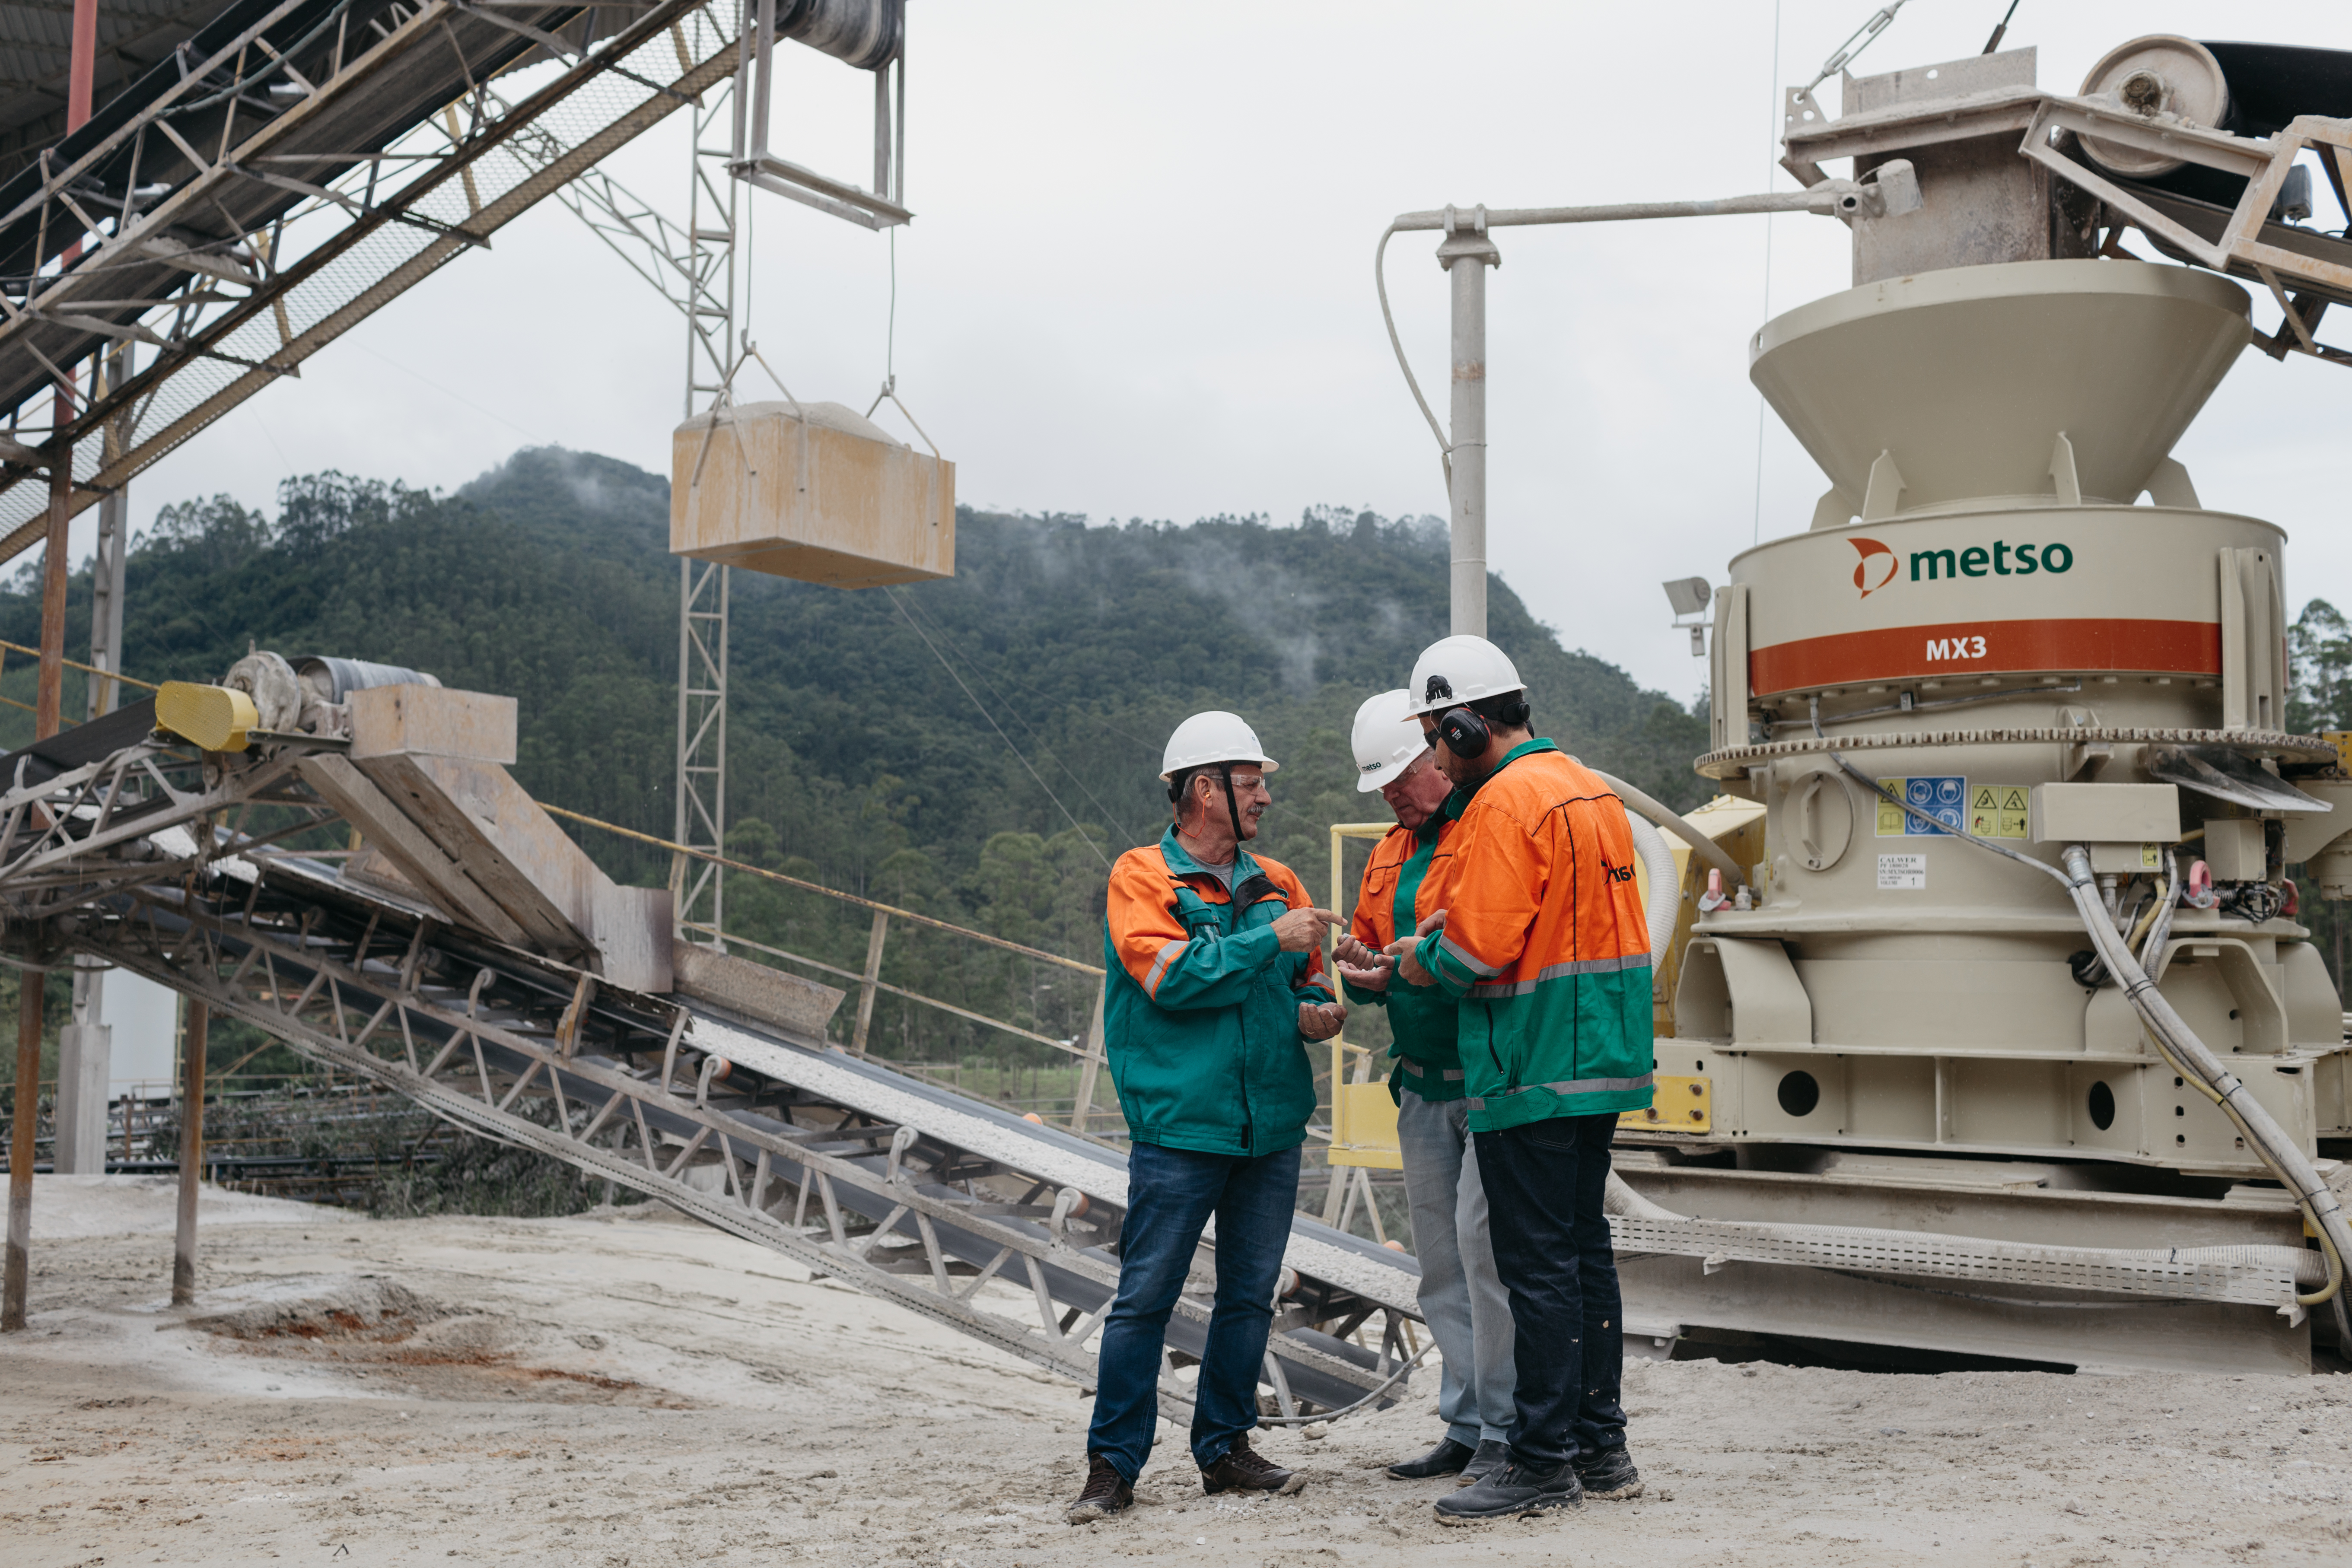 Three Metso employees in front of MX3 crusher at Calwer Quarry